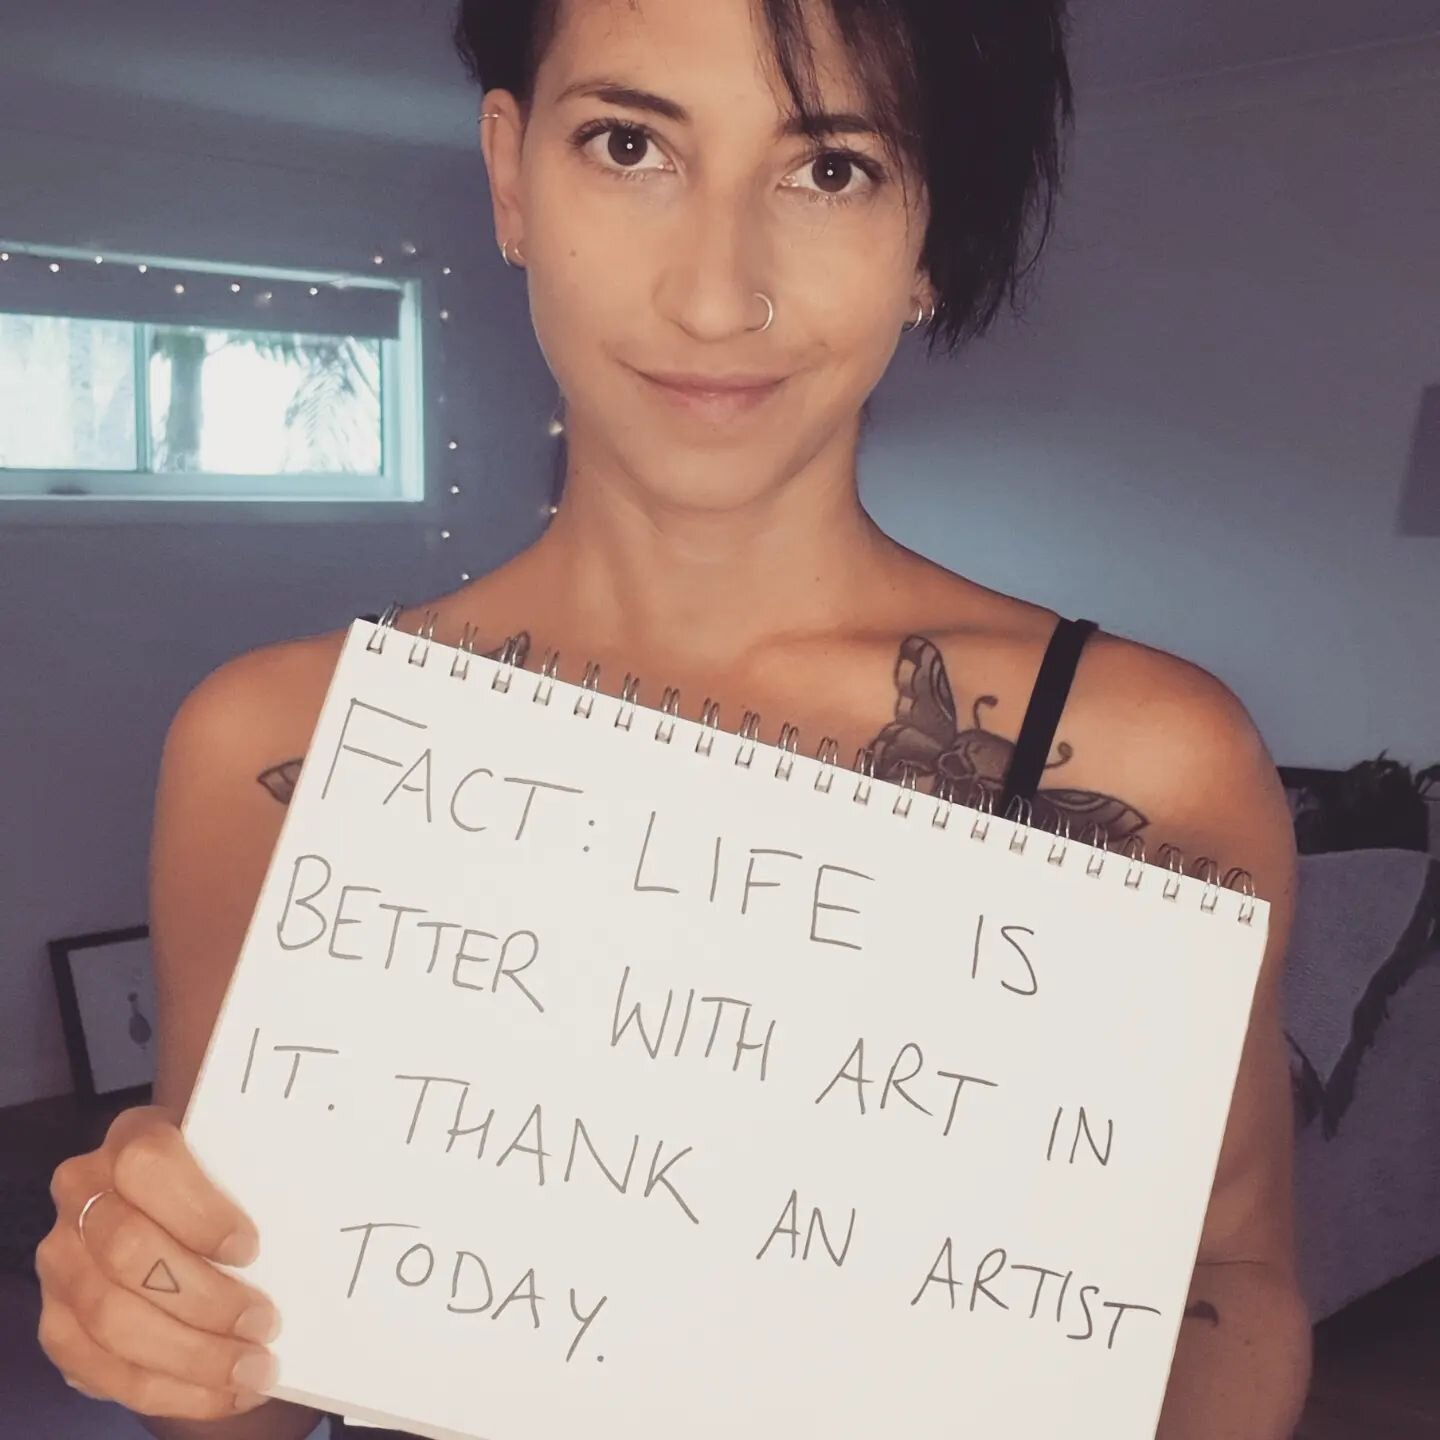 FACT: LIFE IS BETTER WITH ART IN IT. THANK AN ARTIST TODAY. 
.
Tag an artist you admire below to say thanks and share this post to your story!
.
Thanks @inspiredtowrite (from who I give full credit to the style of this post) for your wonderful novel 